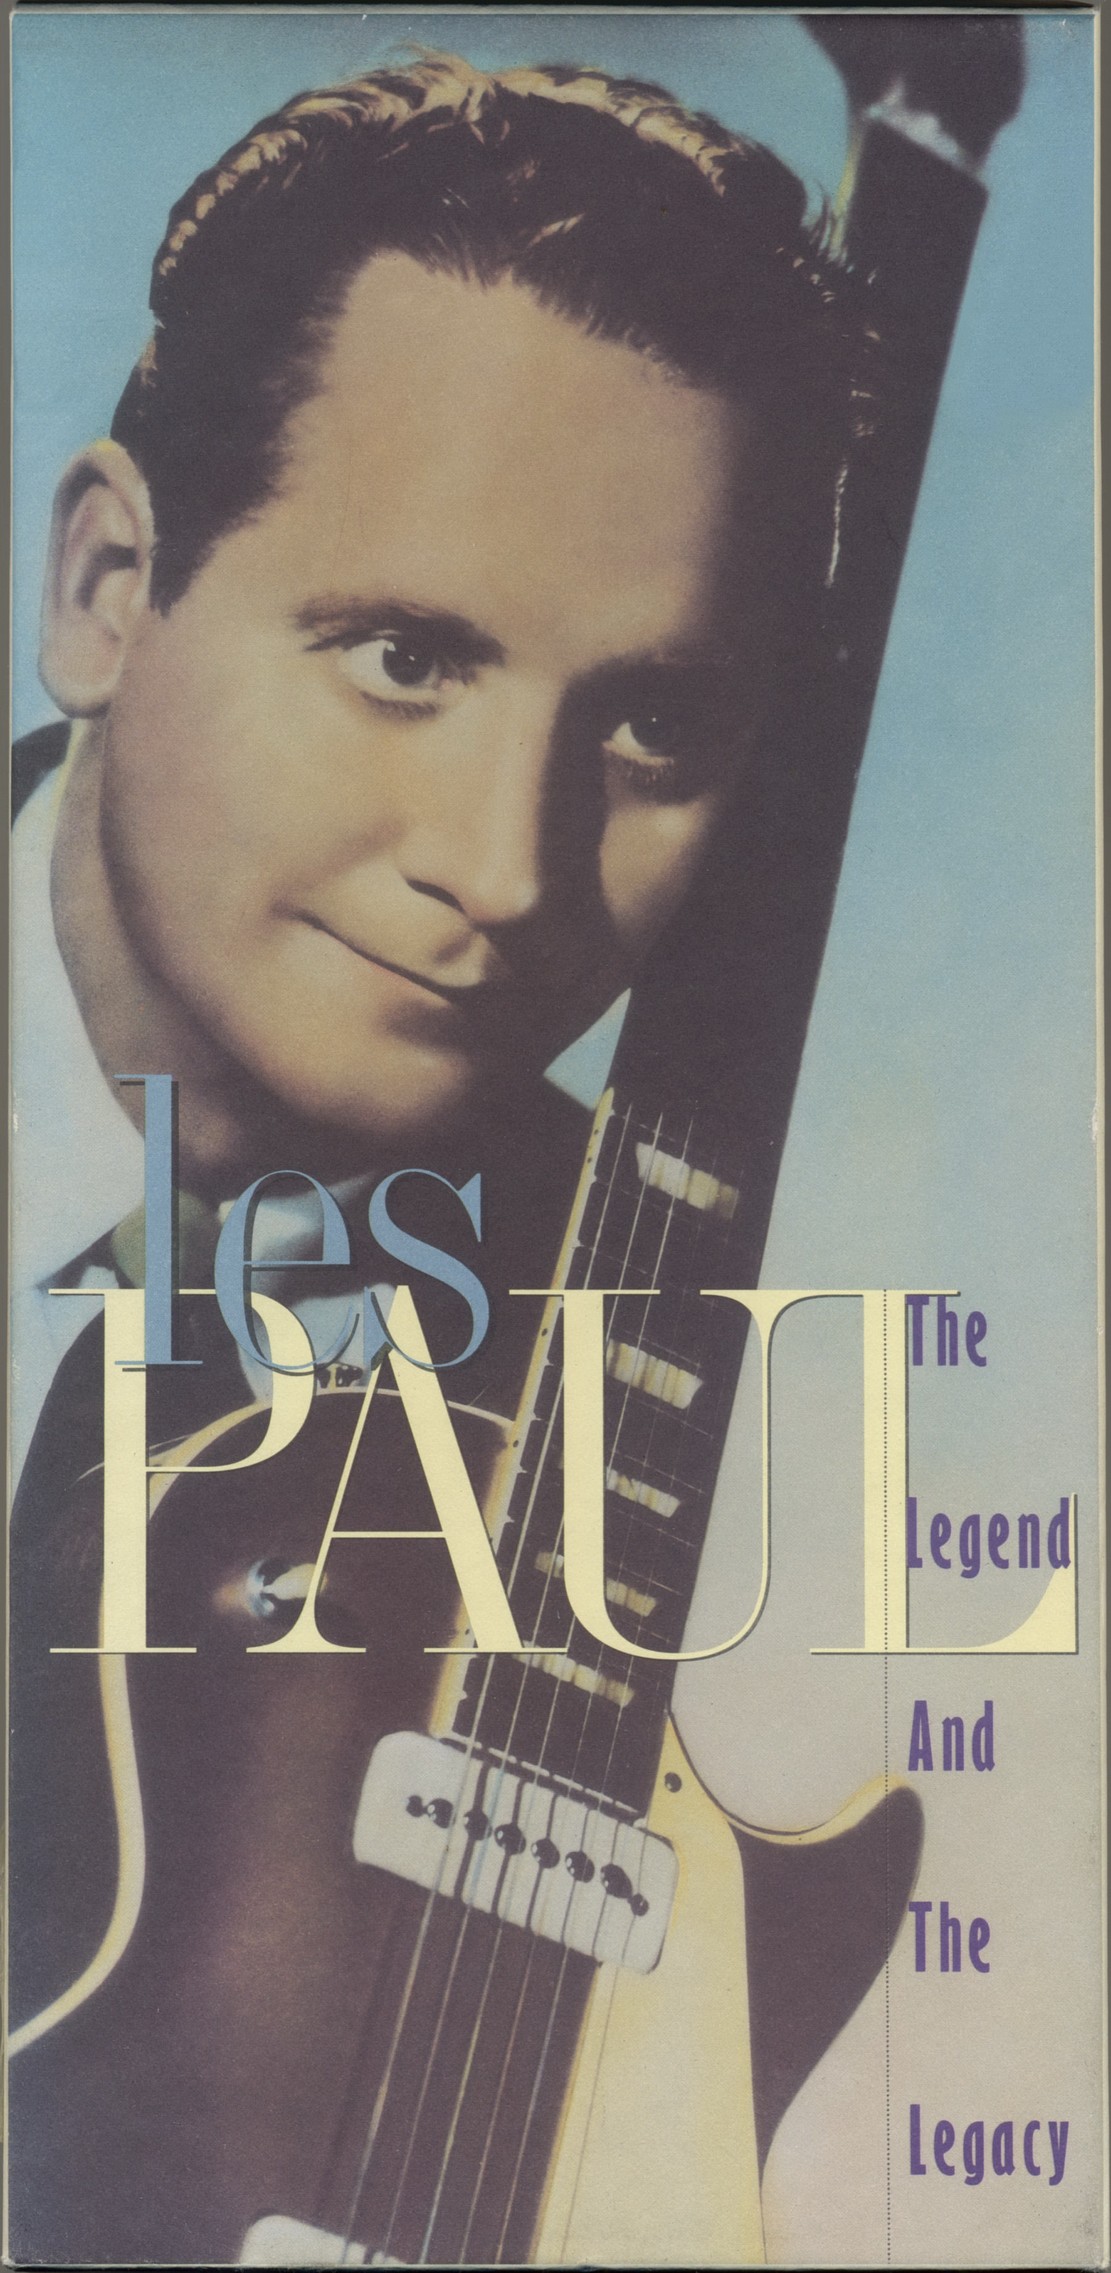 LES PAUL - The Legend and the Legacy cover 